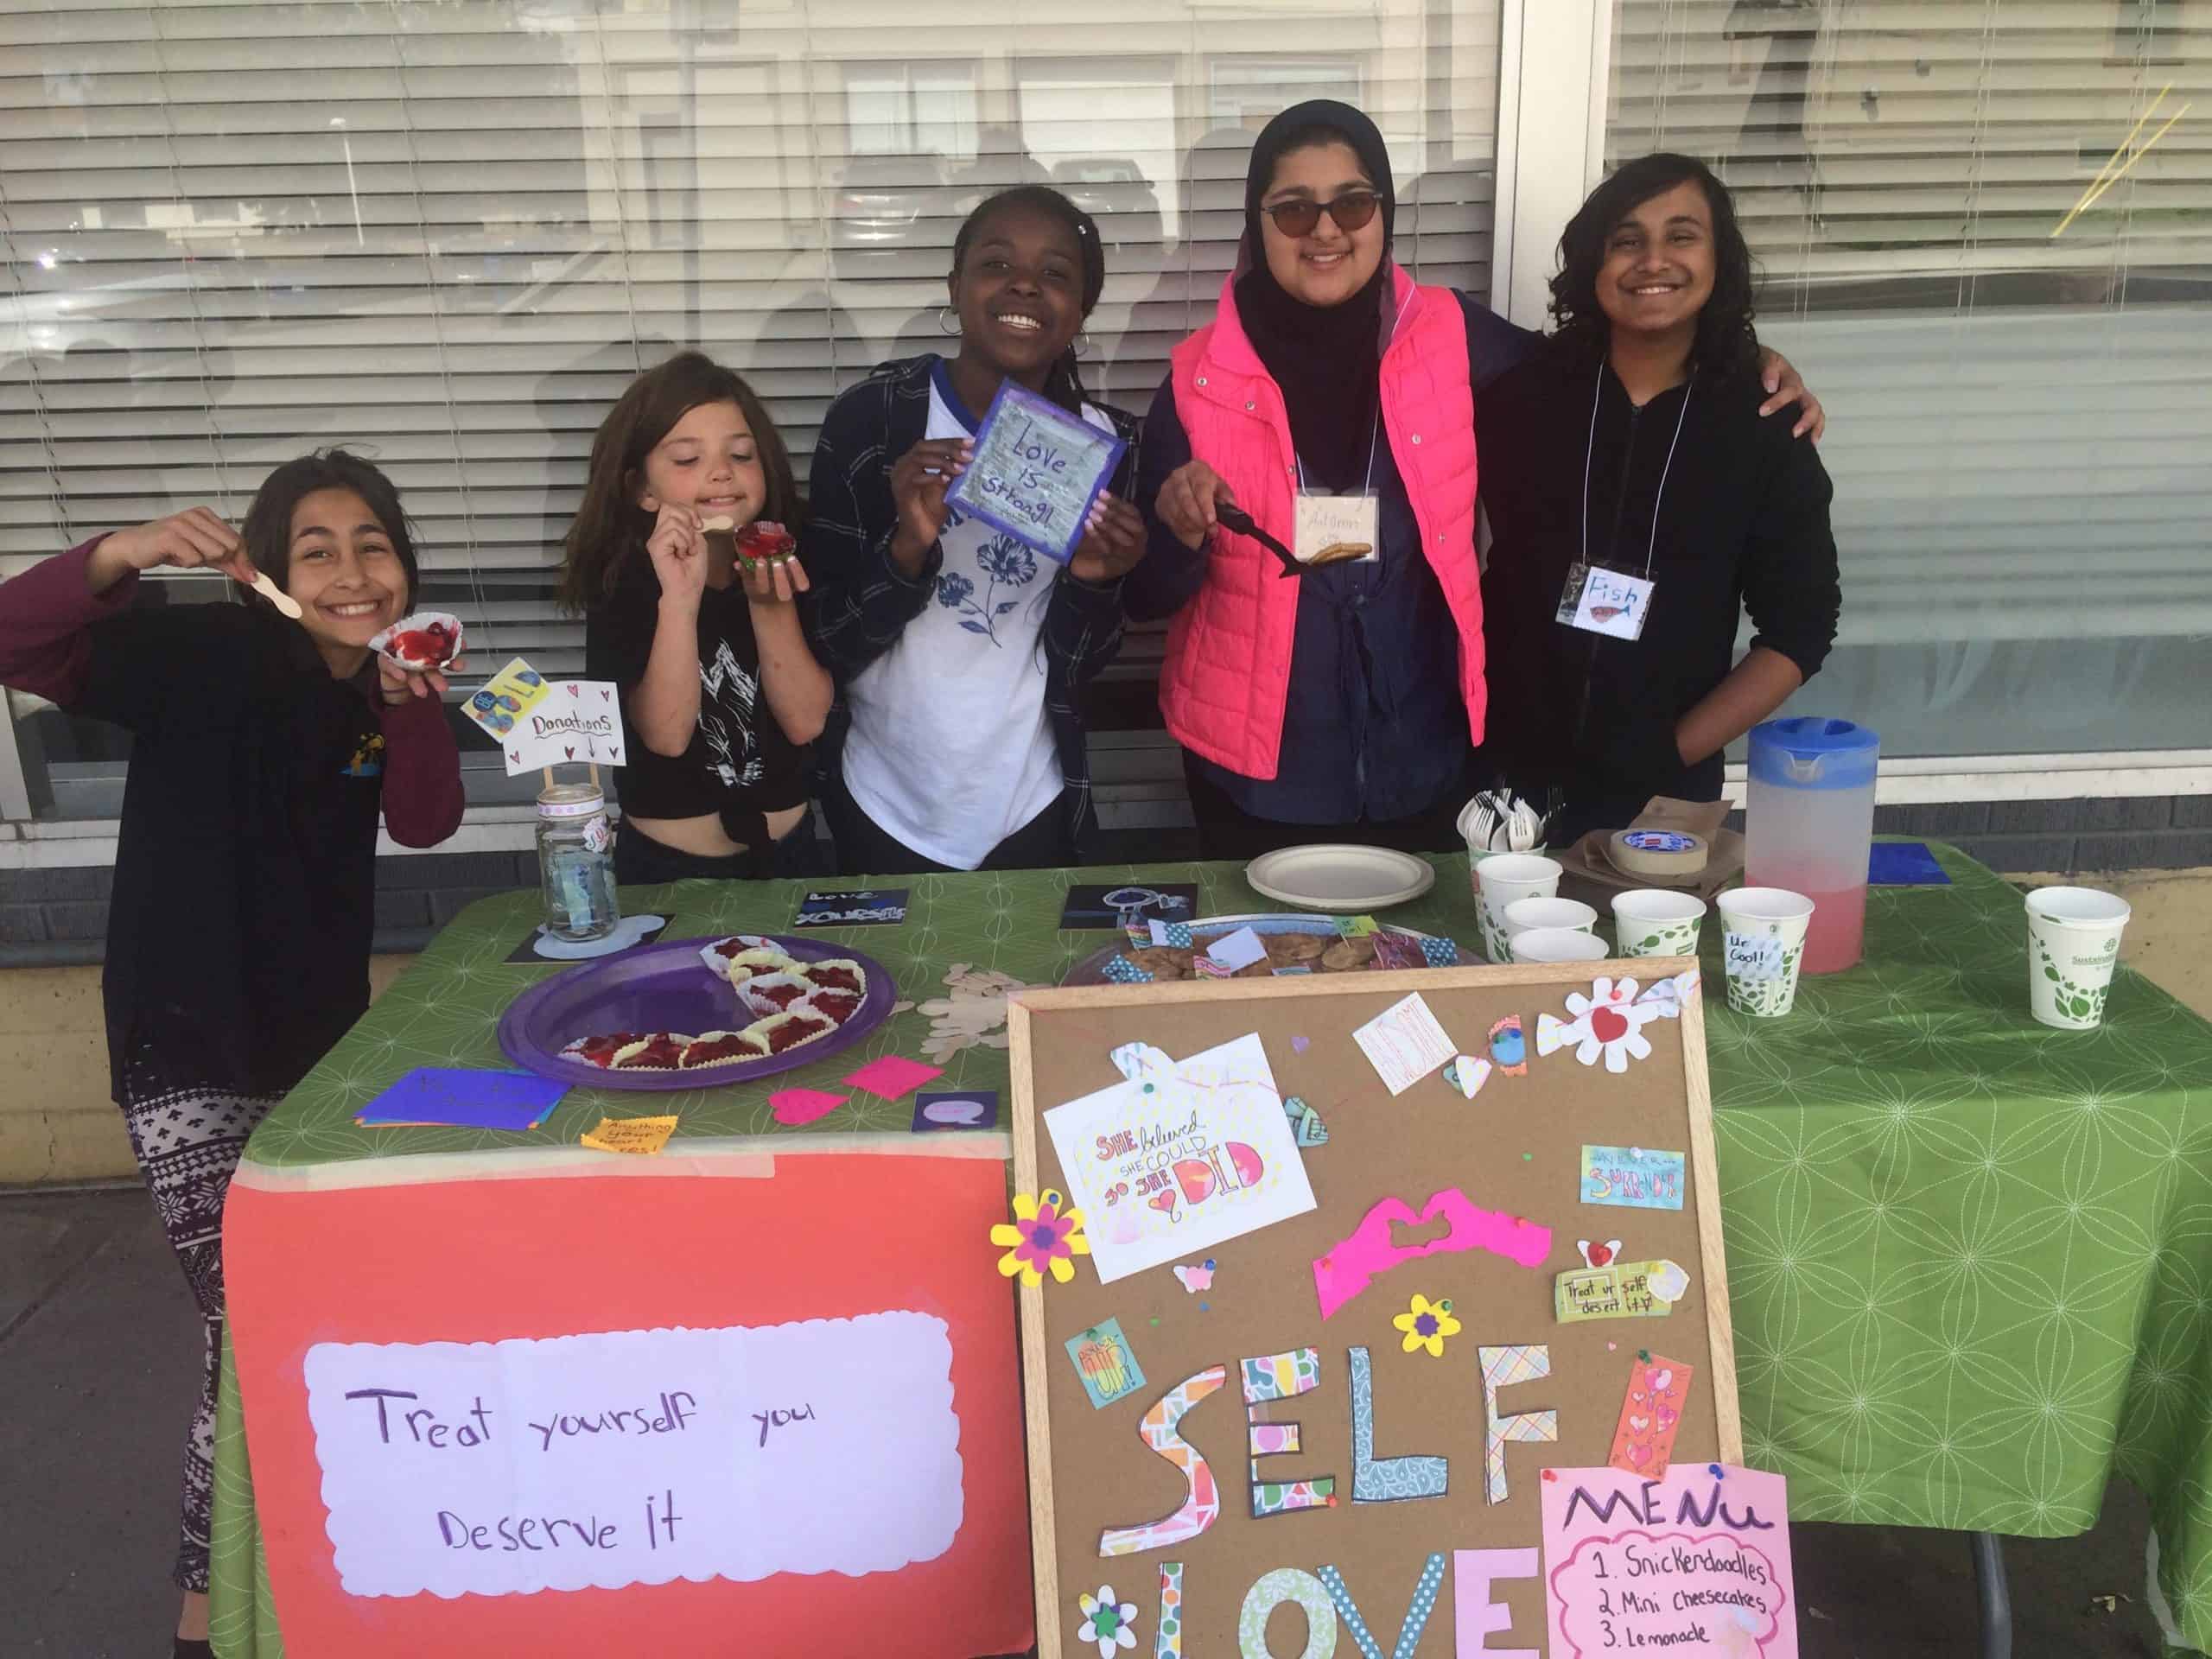 Group of girls standing behind a table with table of refreshments and signs saying "self-love"